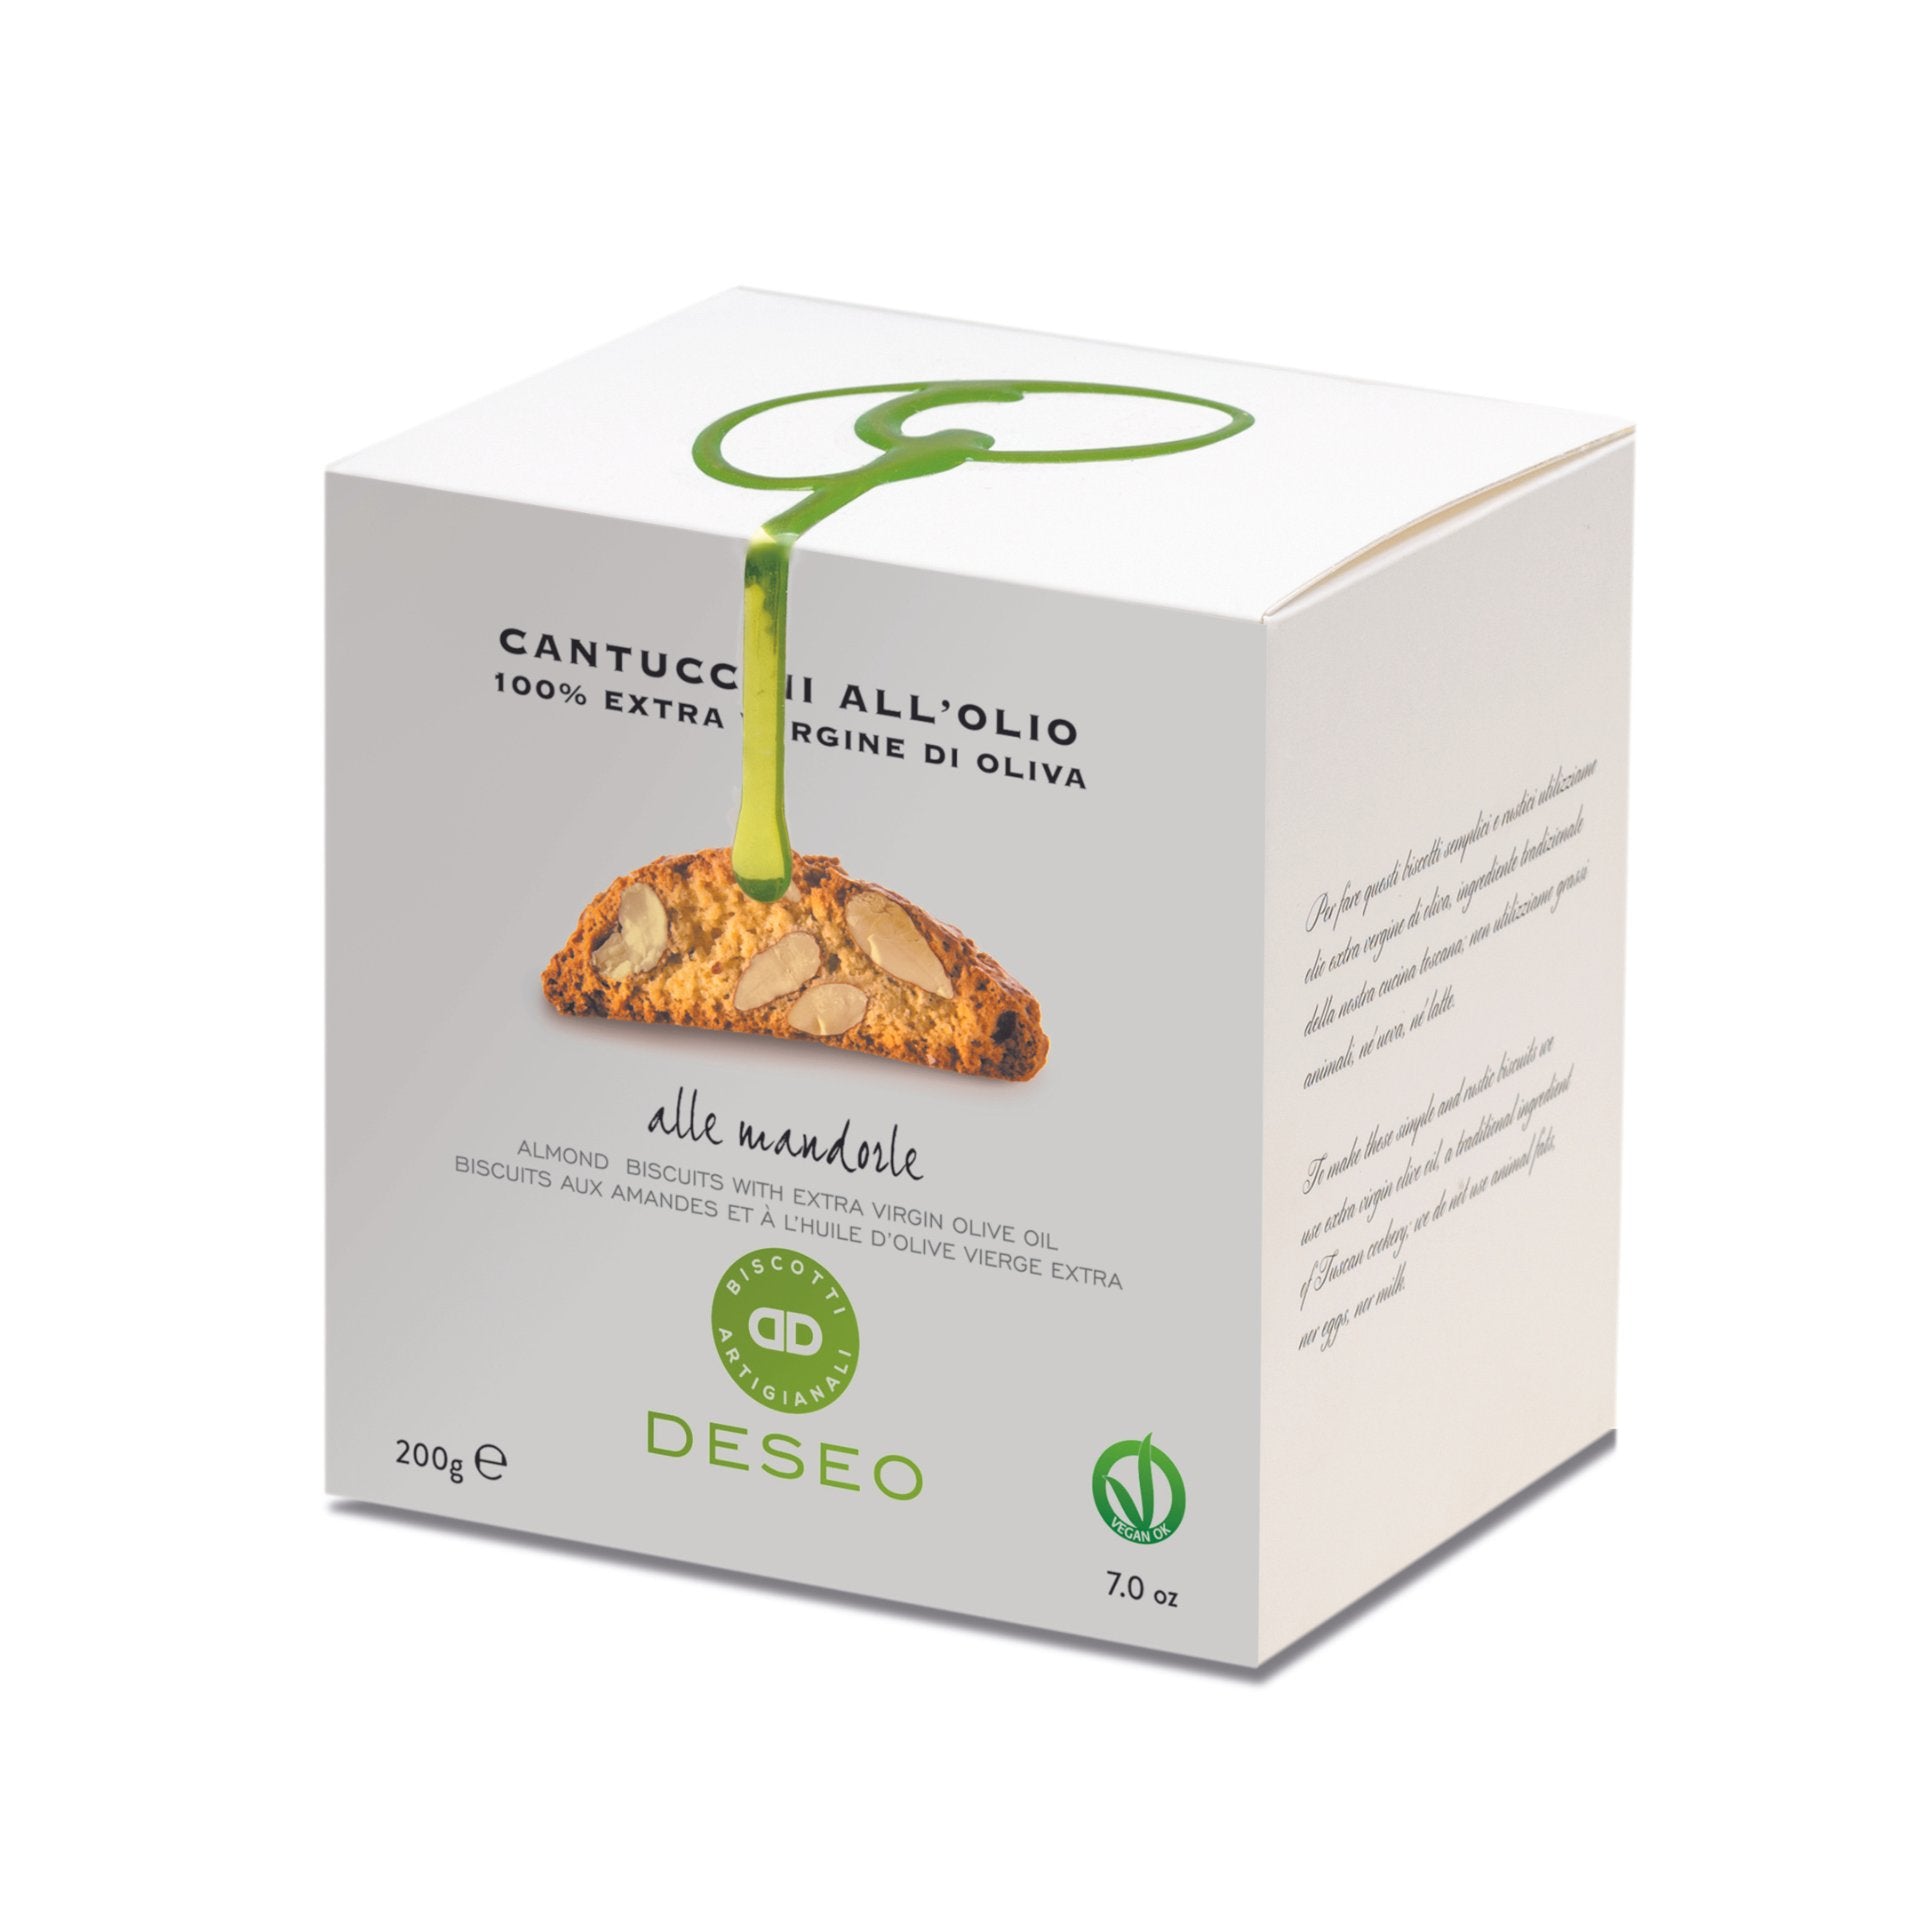 Deseo Vegan Cantuccini w/ Extra Virgin Olive Oil 200g Feast Italy